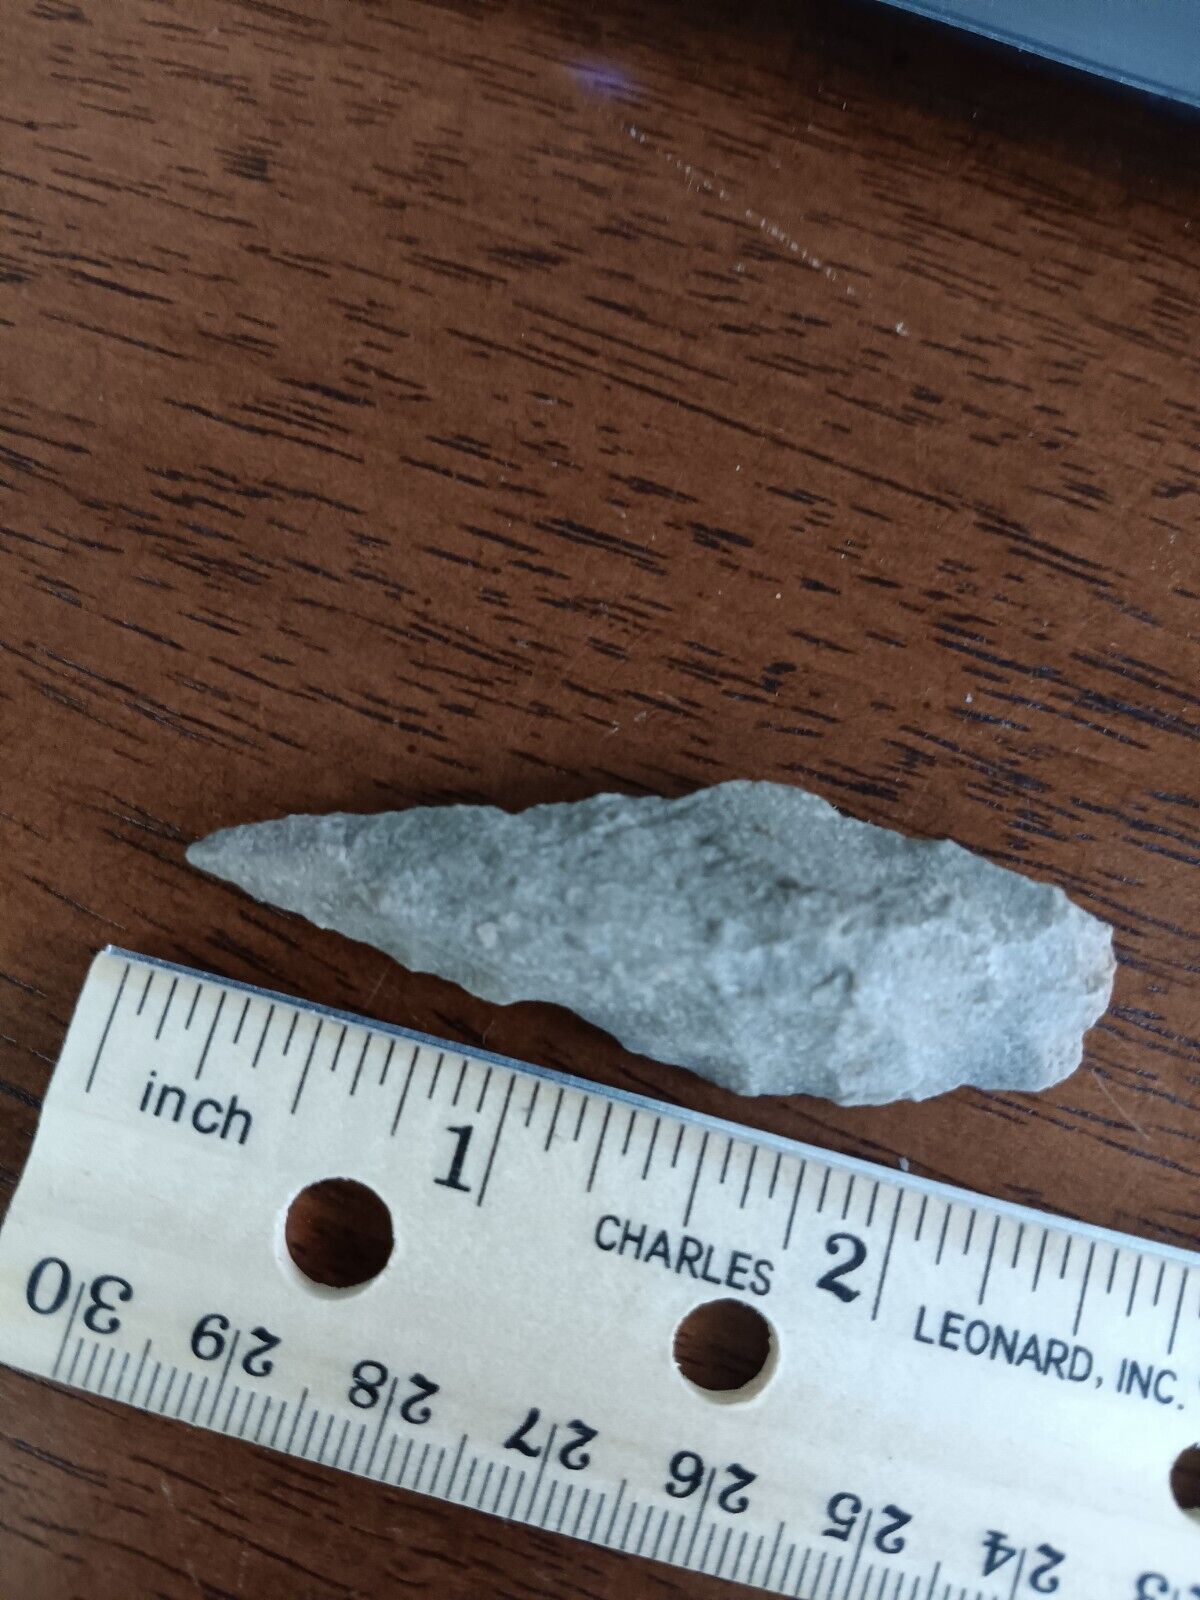 AUTHENTIC NATIVE AMERICAN INDIAN ARTIFACT FOUND, EASTERN N.C.--- ZZZ/67